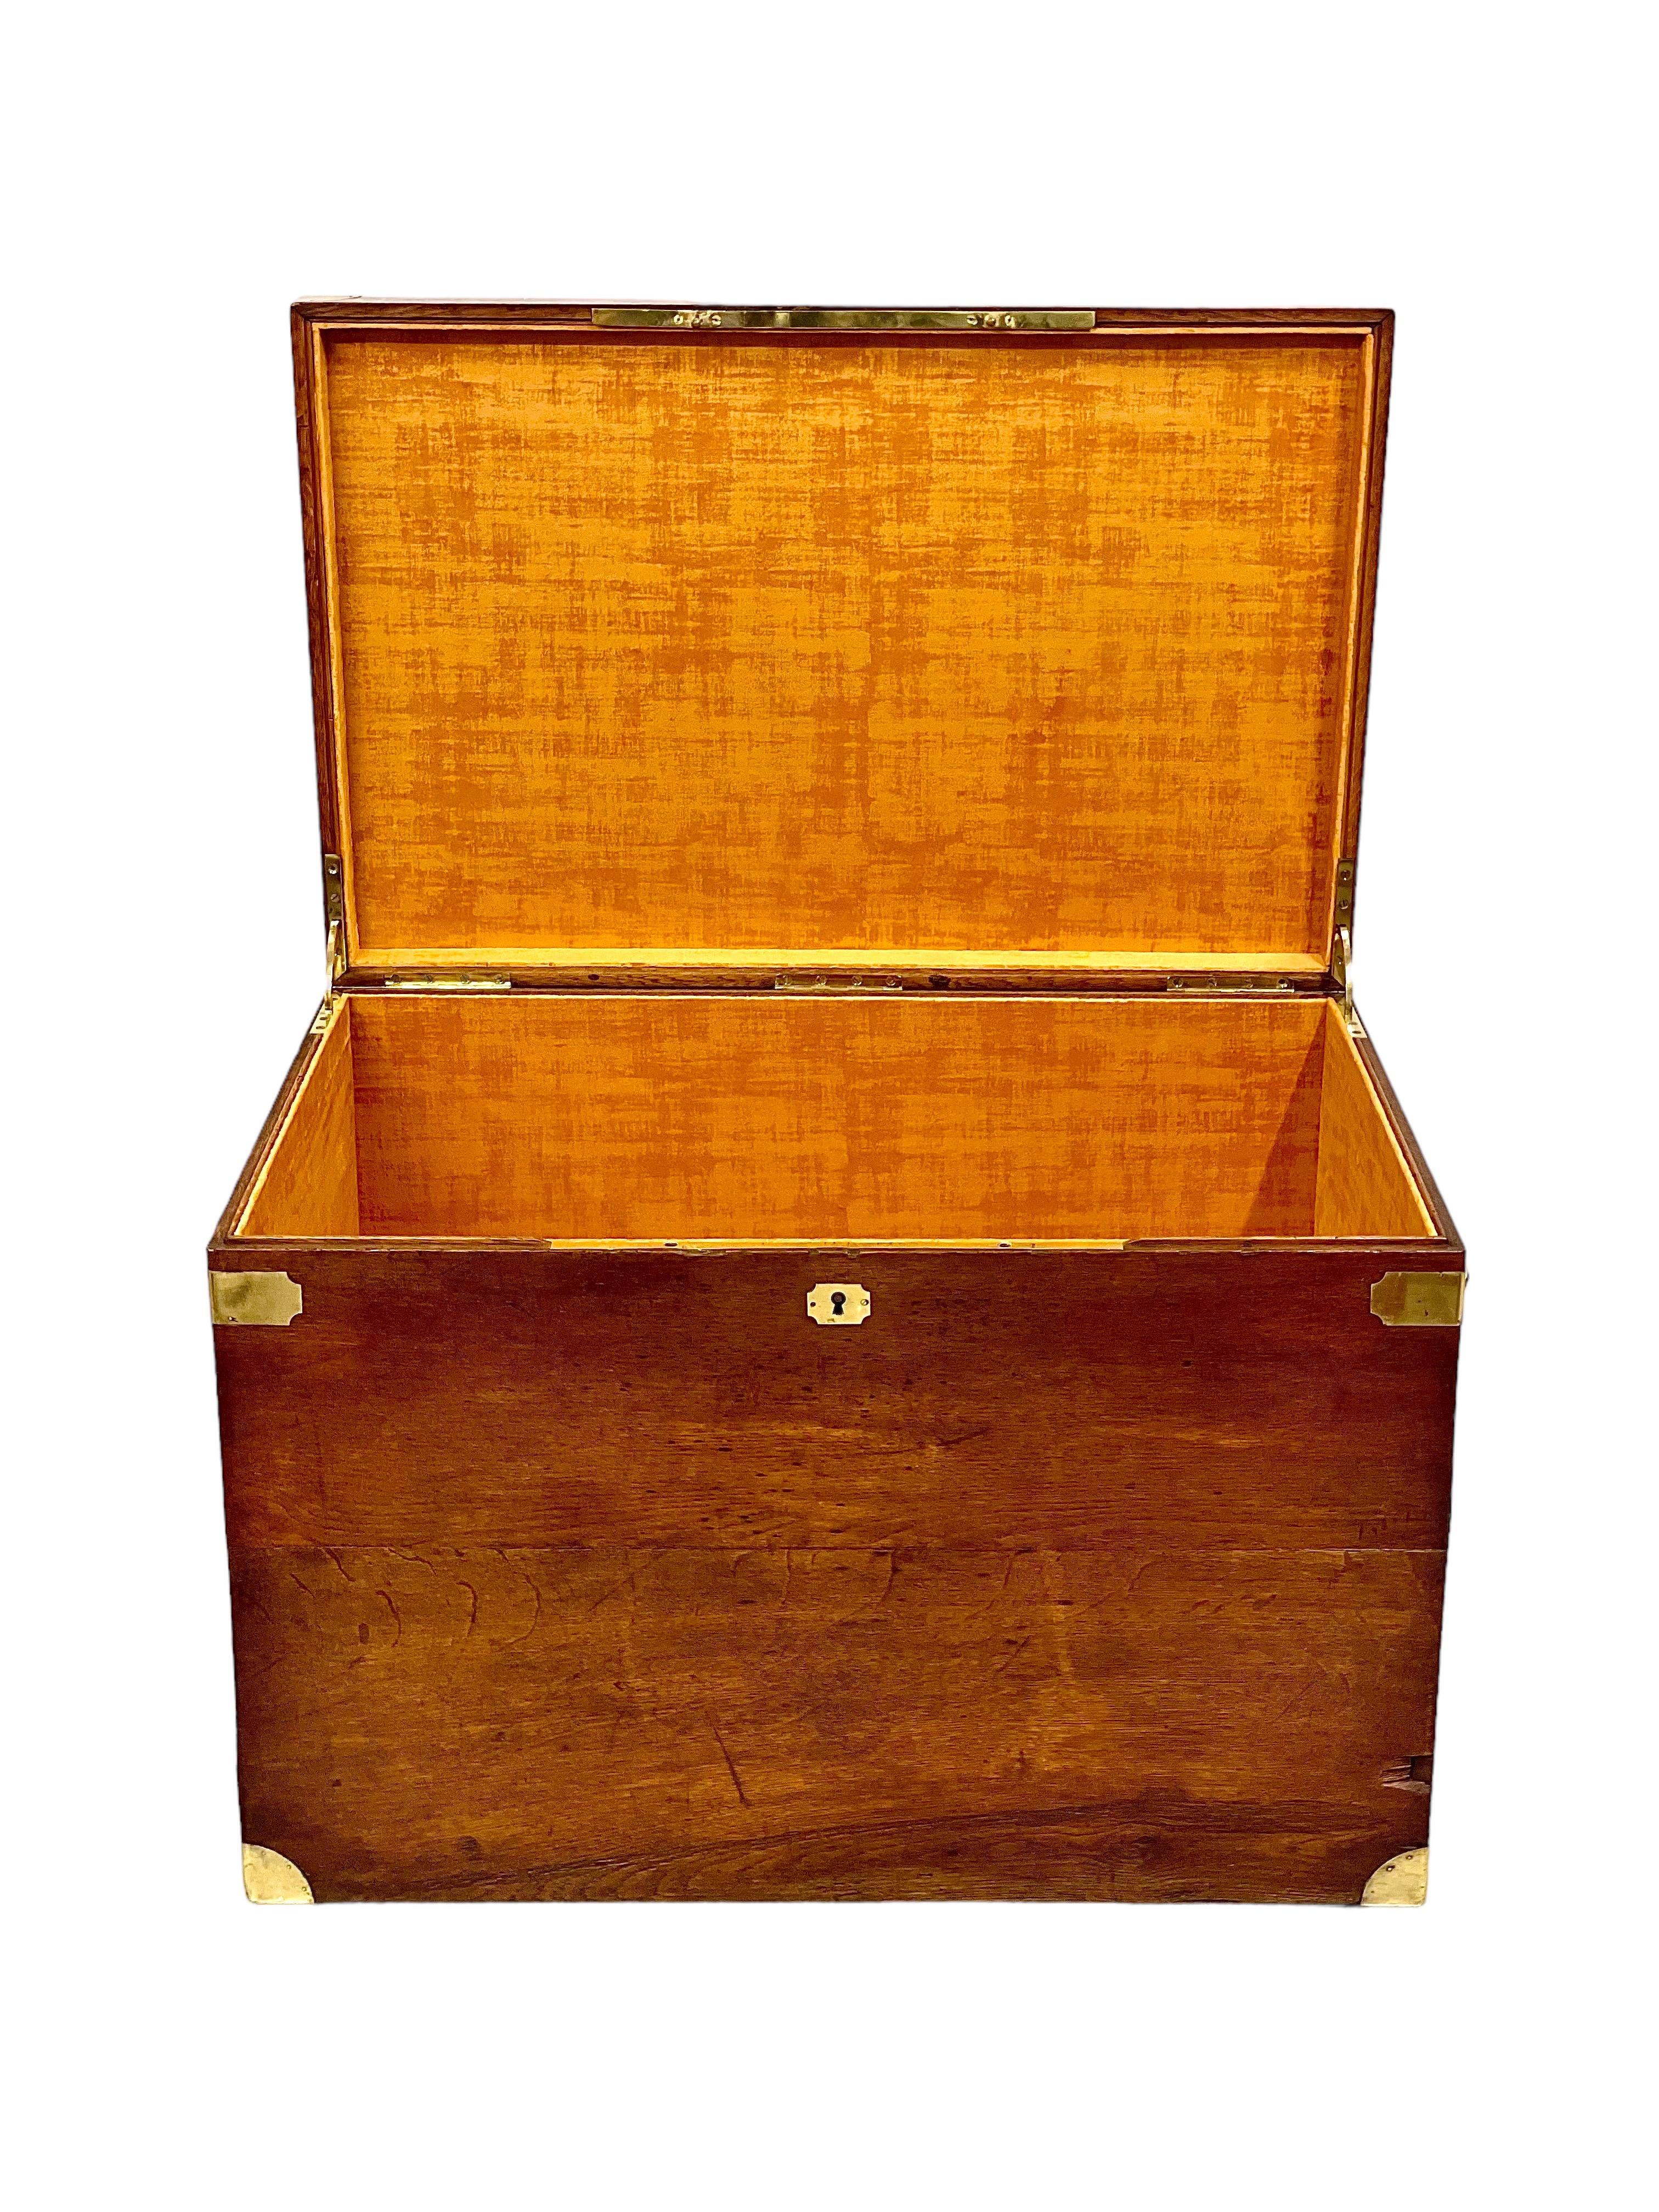 A sturdy and practical antique French storage trunk, made from oak, with brass fixings and bronze side handles, dating from the end of the 19th century. Inlaid on the top is a brass plate sporting a coat of arms surmounted by a heraldic helmet and